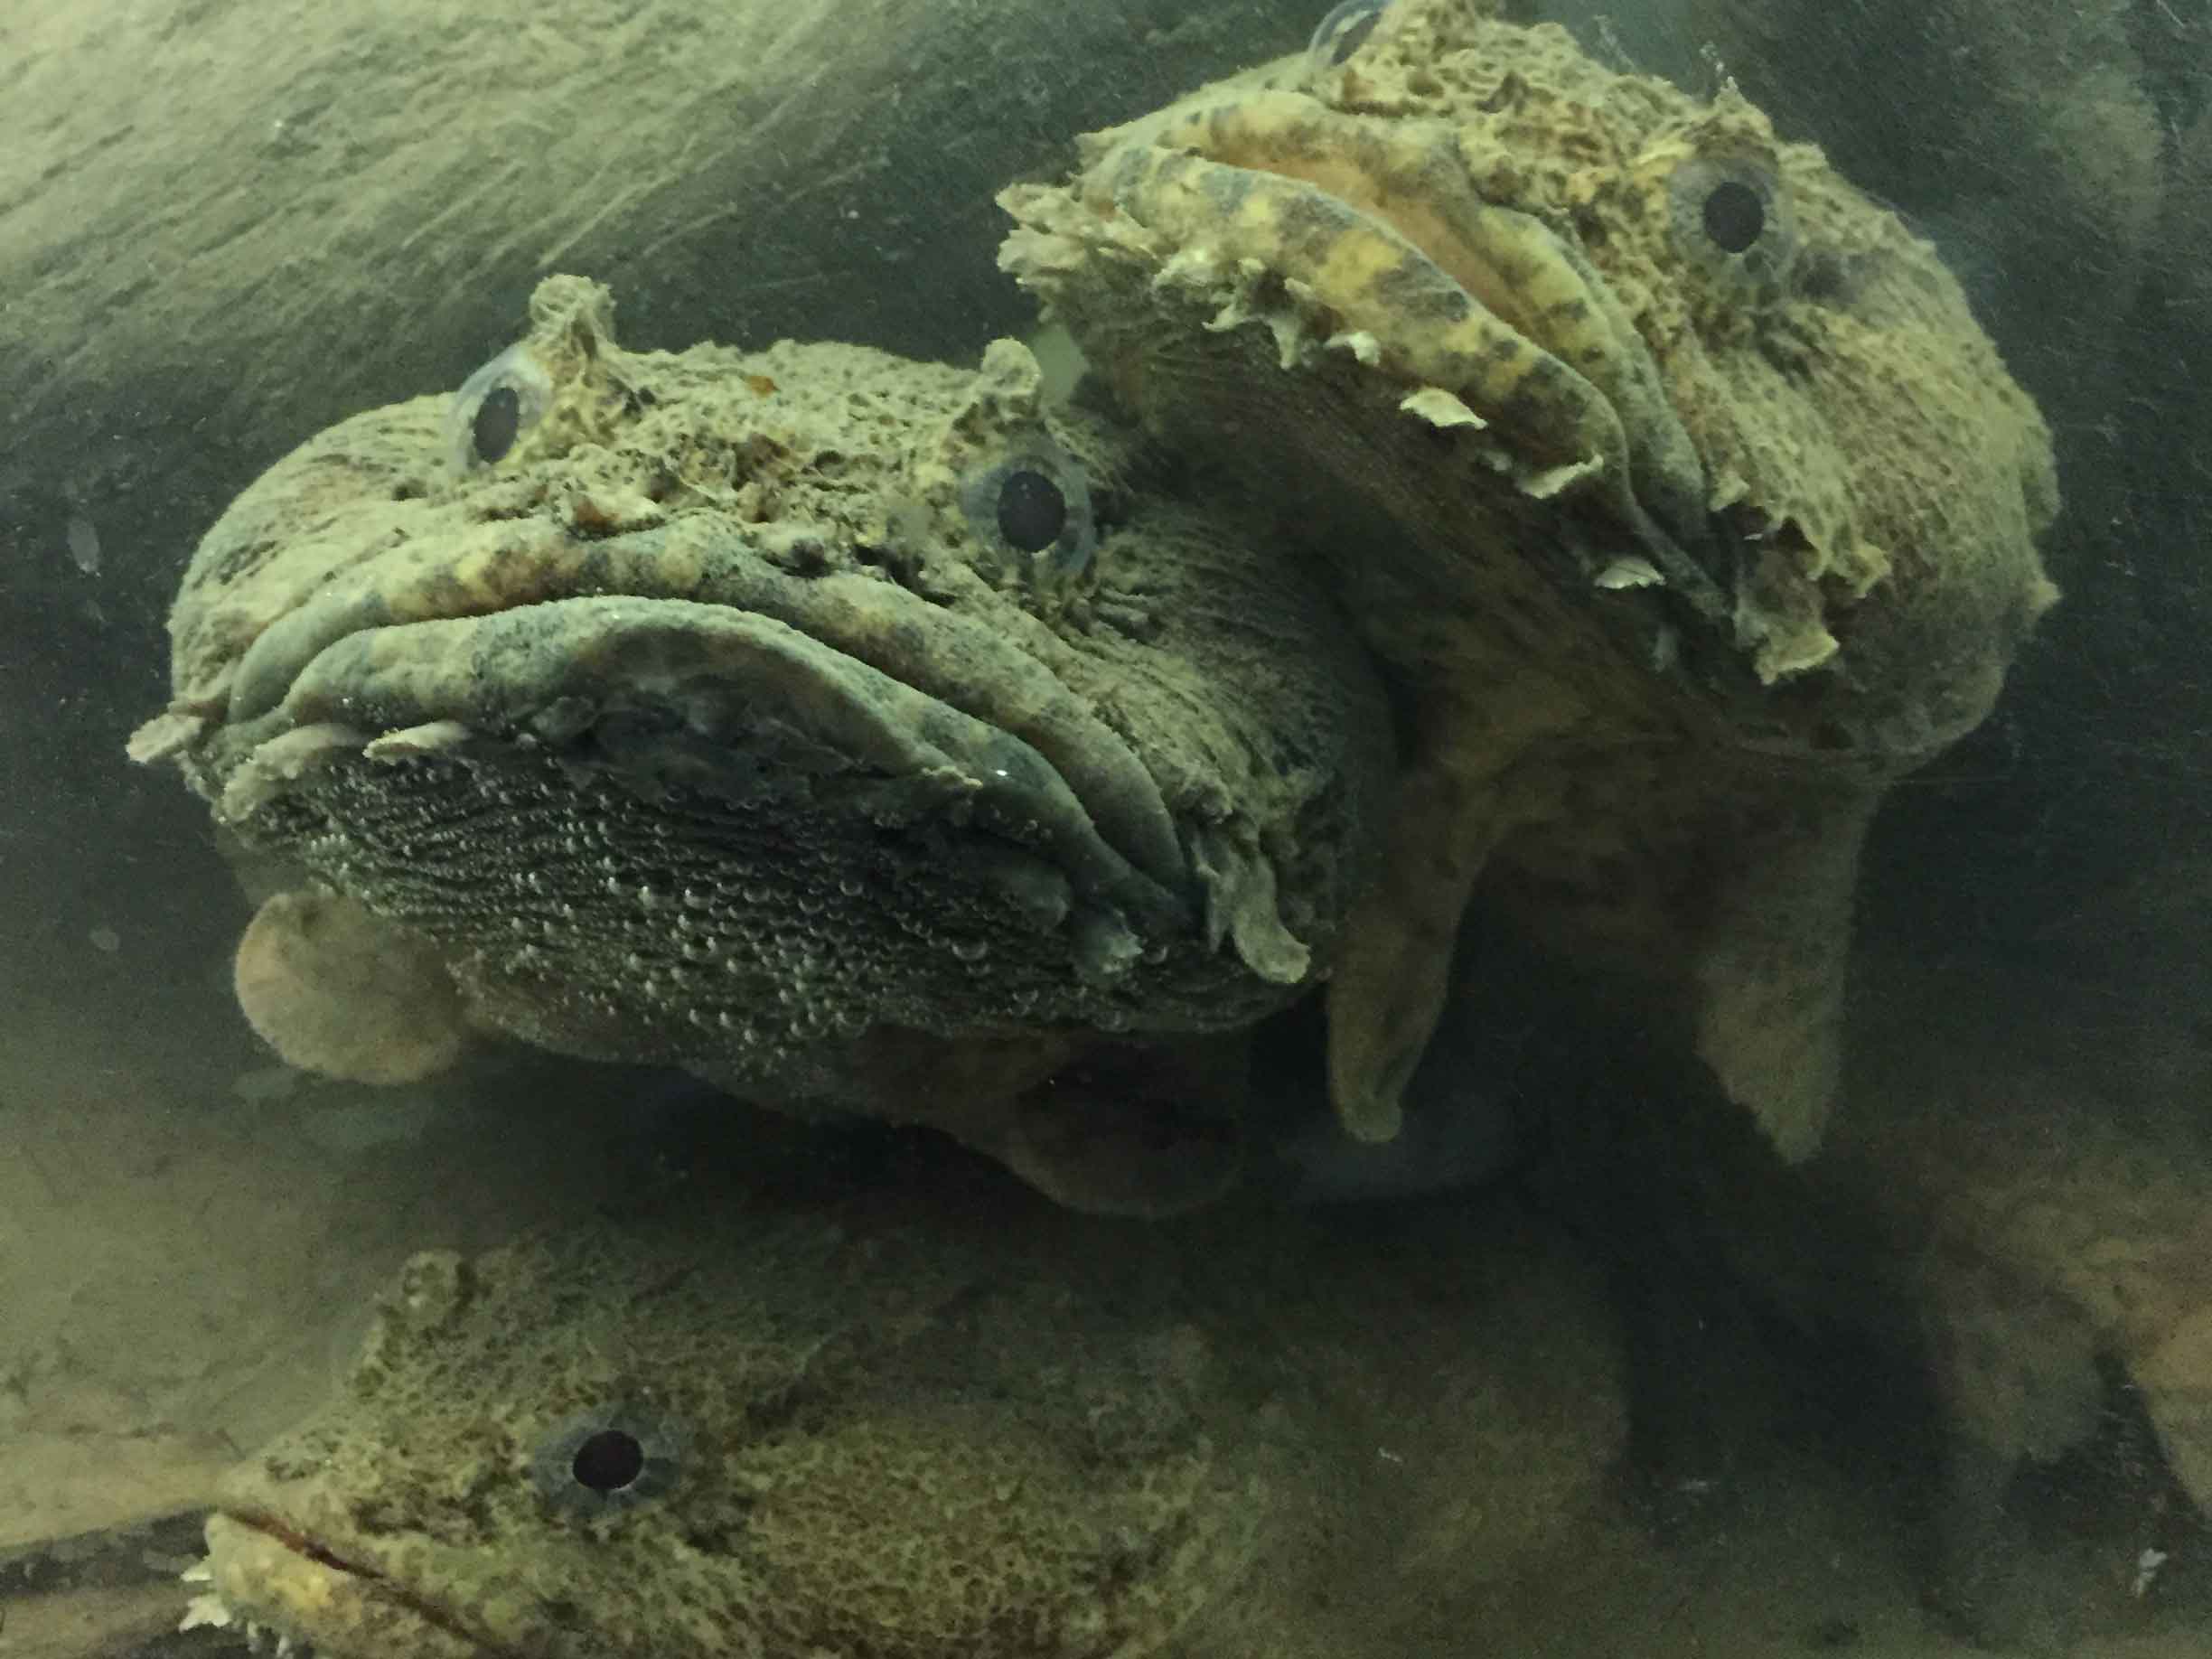 Three toadfish sit on each other looking wondrously